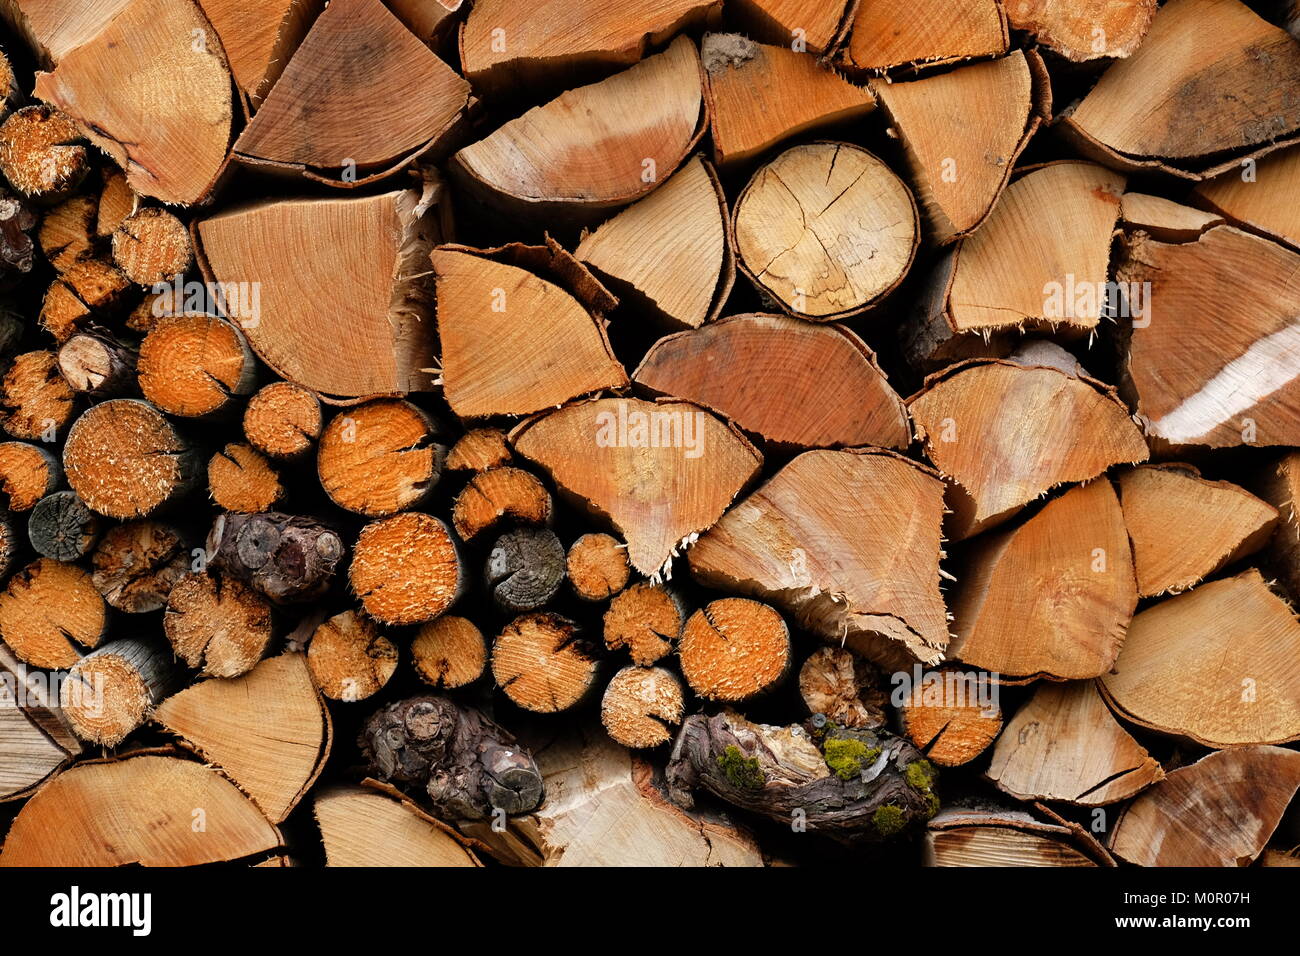 Tightly stacked woodpiles are a frequent sight in parts or Germany. Stock Photo